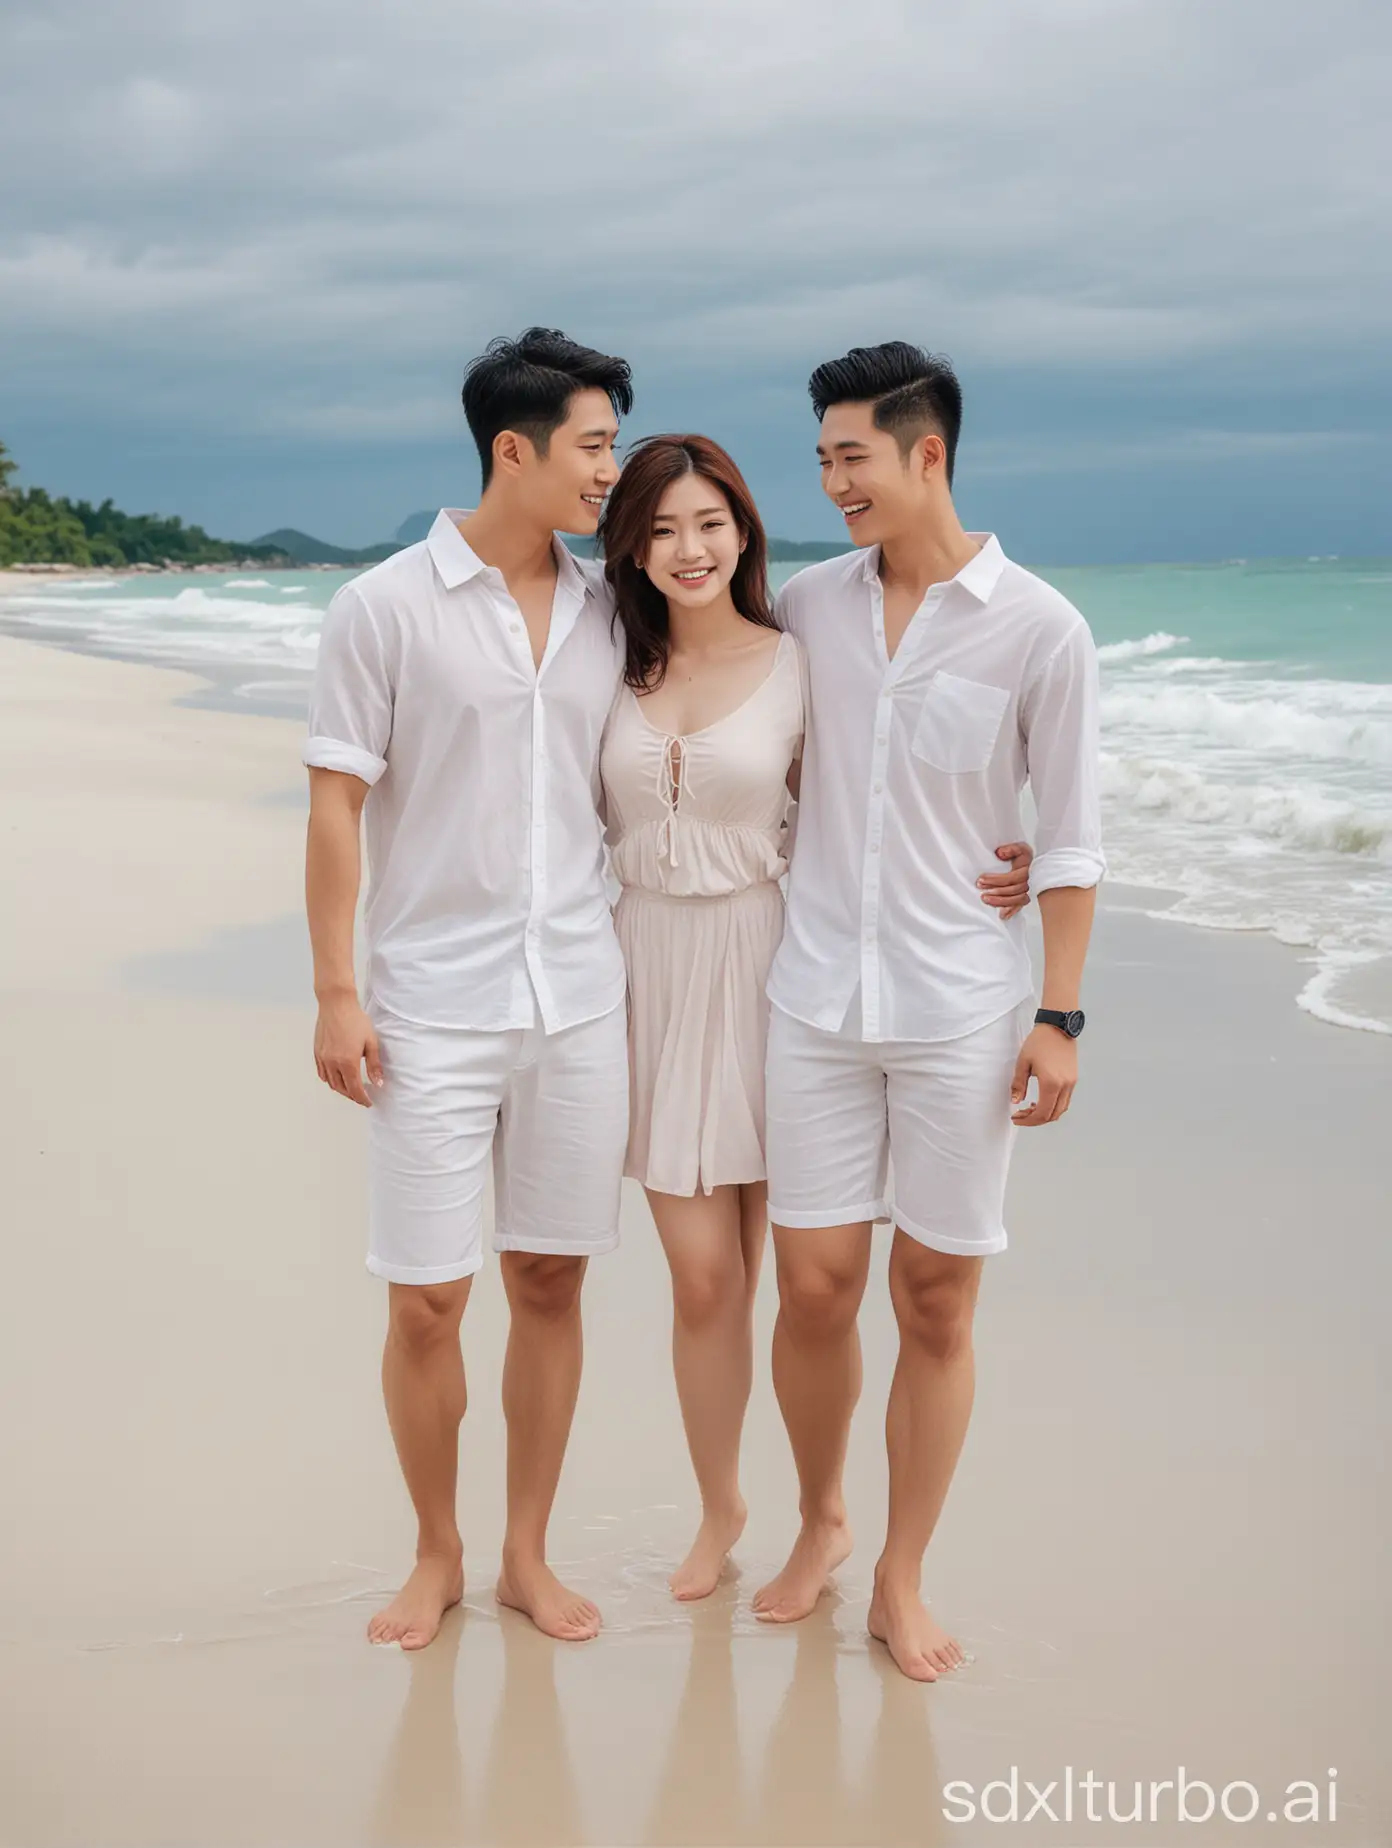 Asian male and female couple, white skin, standing on the beach, supporting each other, beautiful white sand beach, HD quality